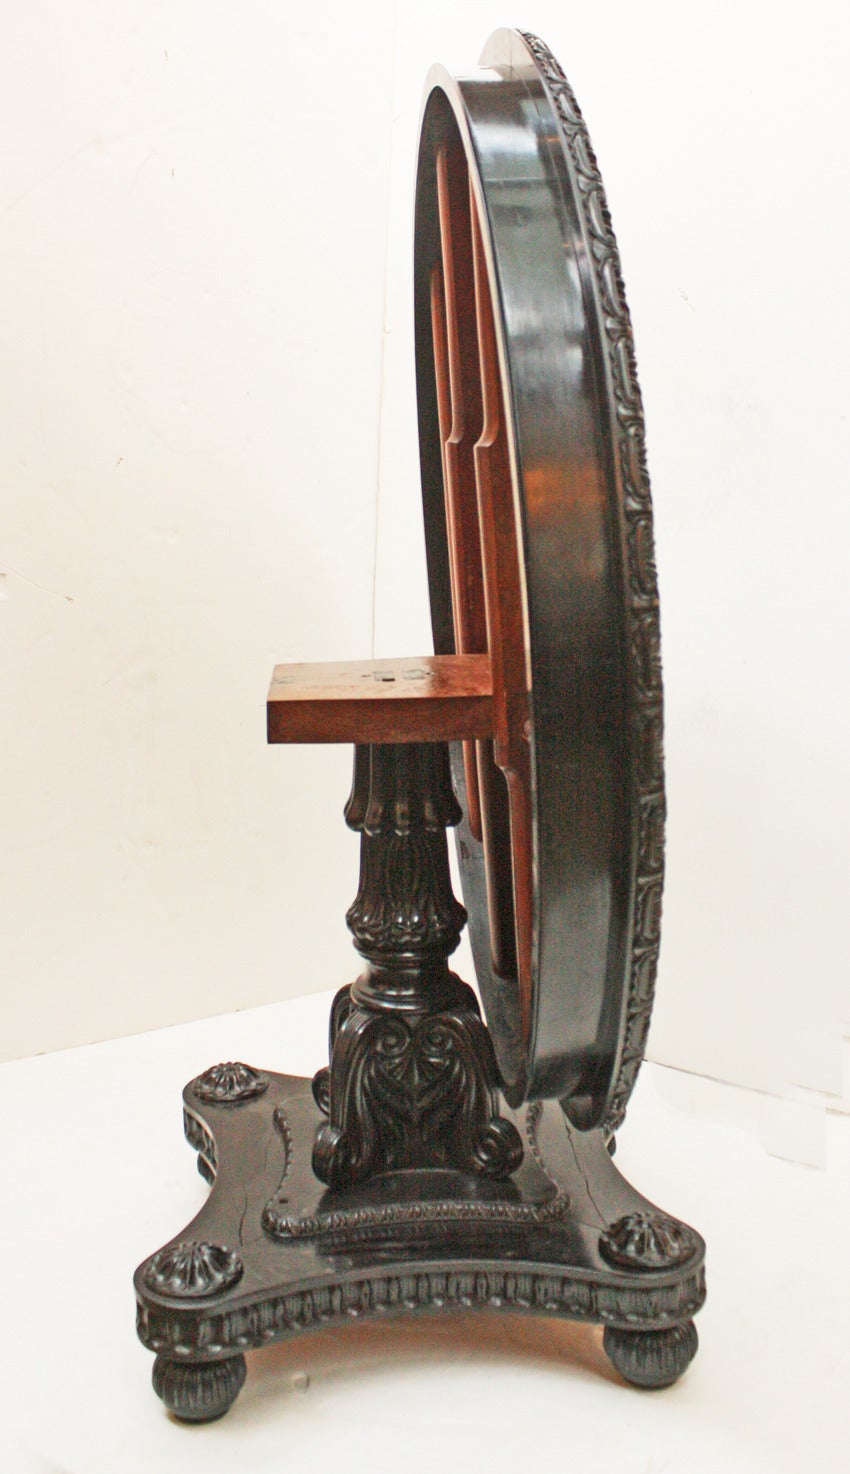 Carved Anglo-Indian, Ceylonese Ebony and Specimen Wood Centre Table